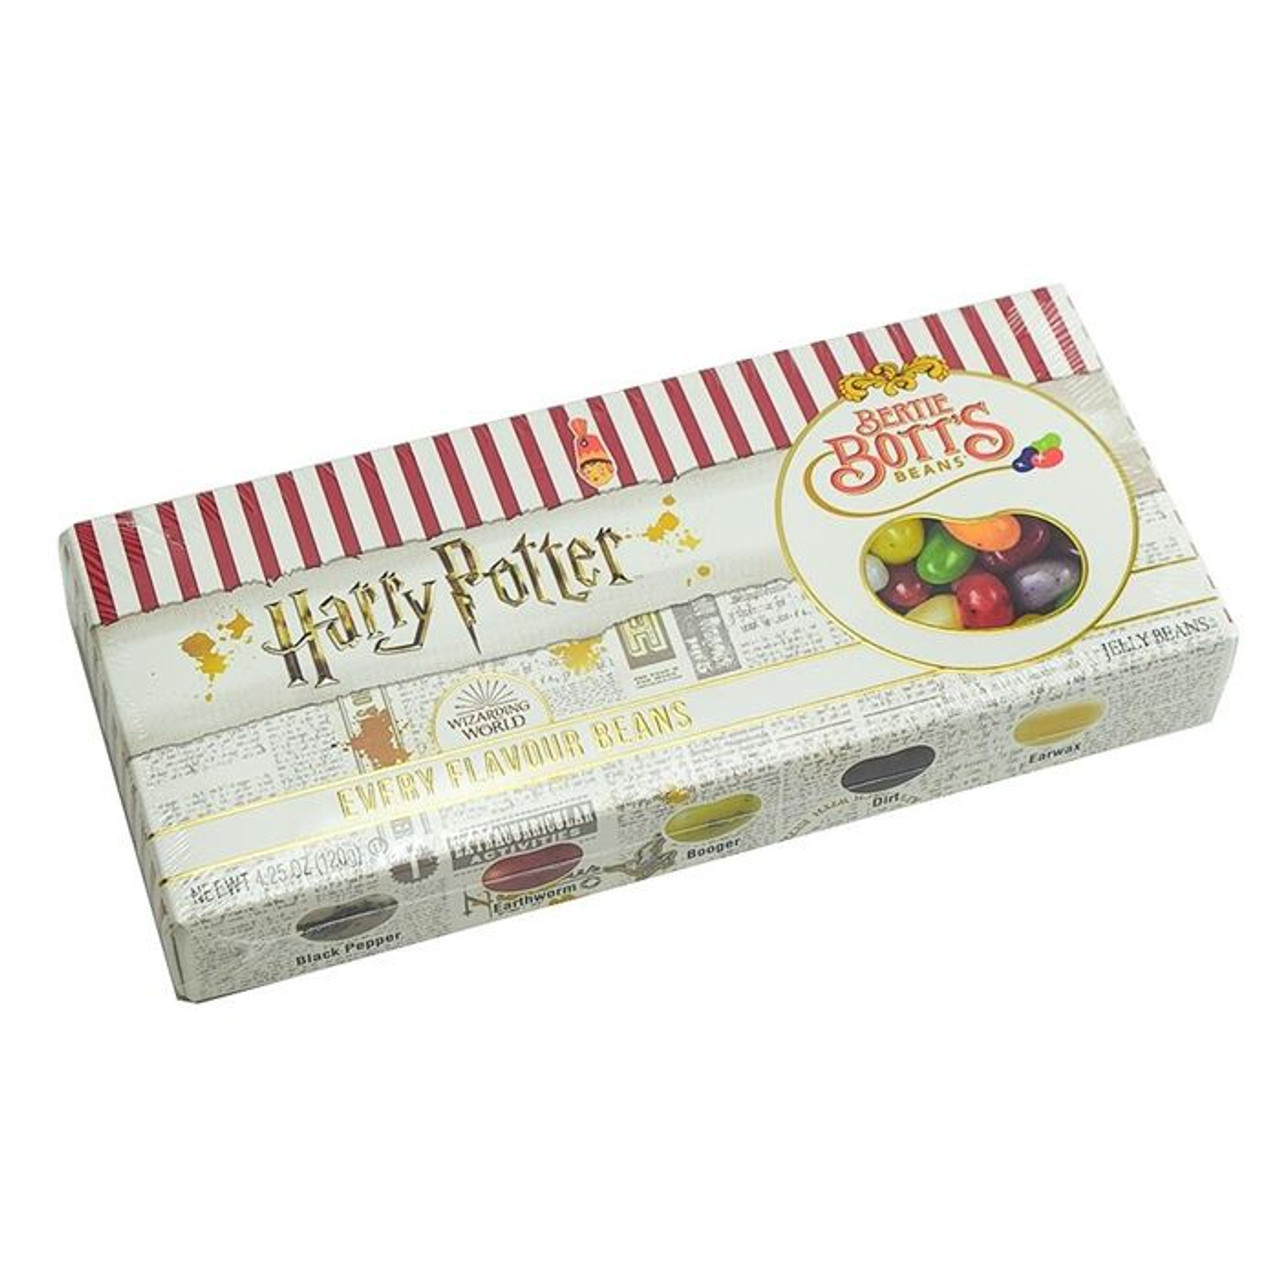 bertie botts every flavour beans guide